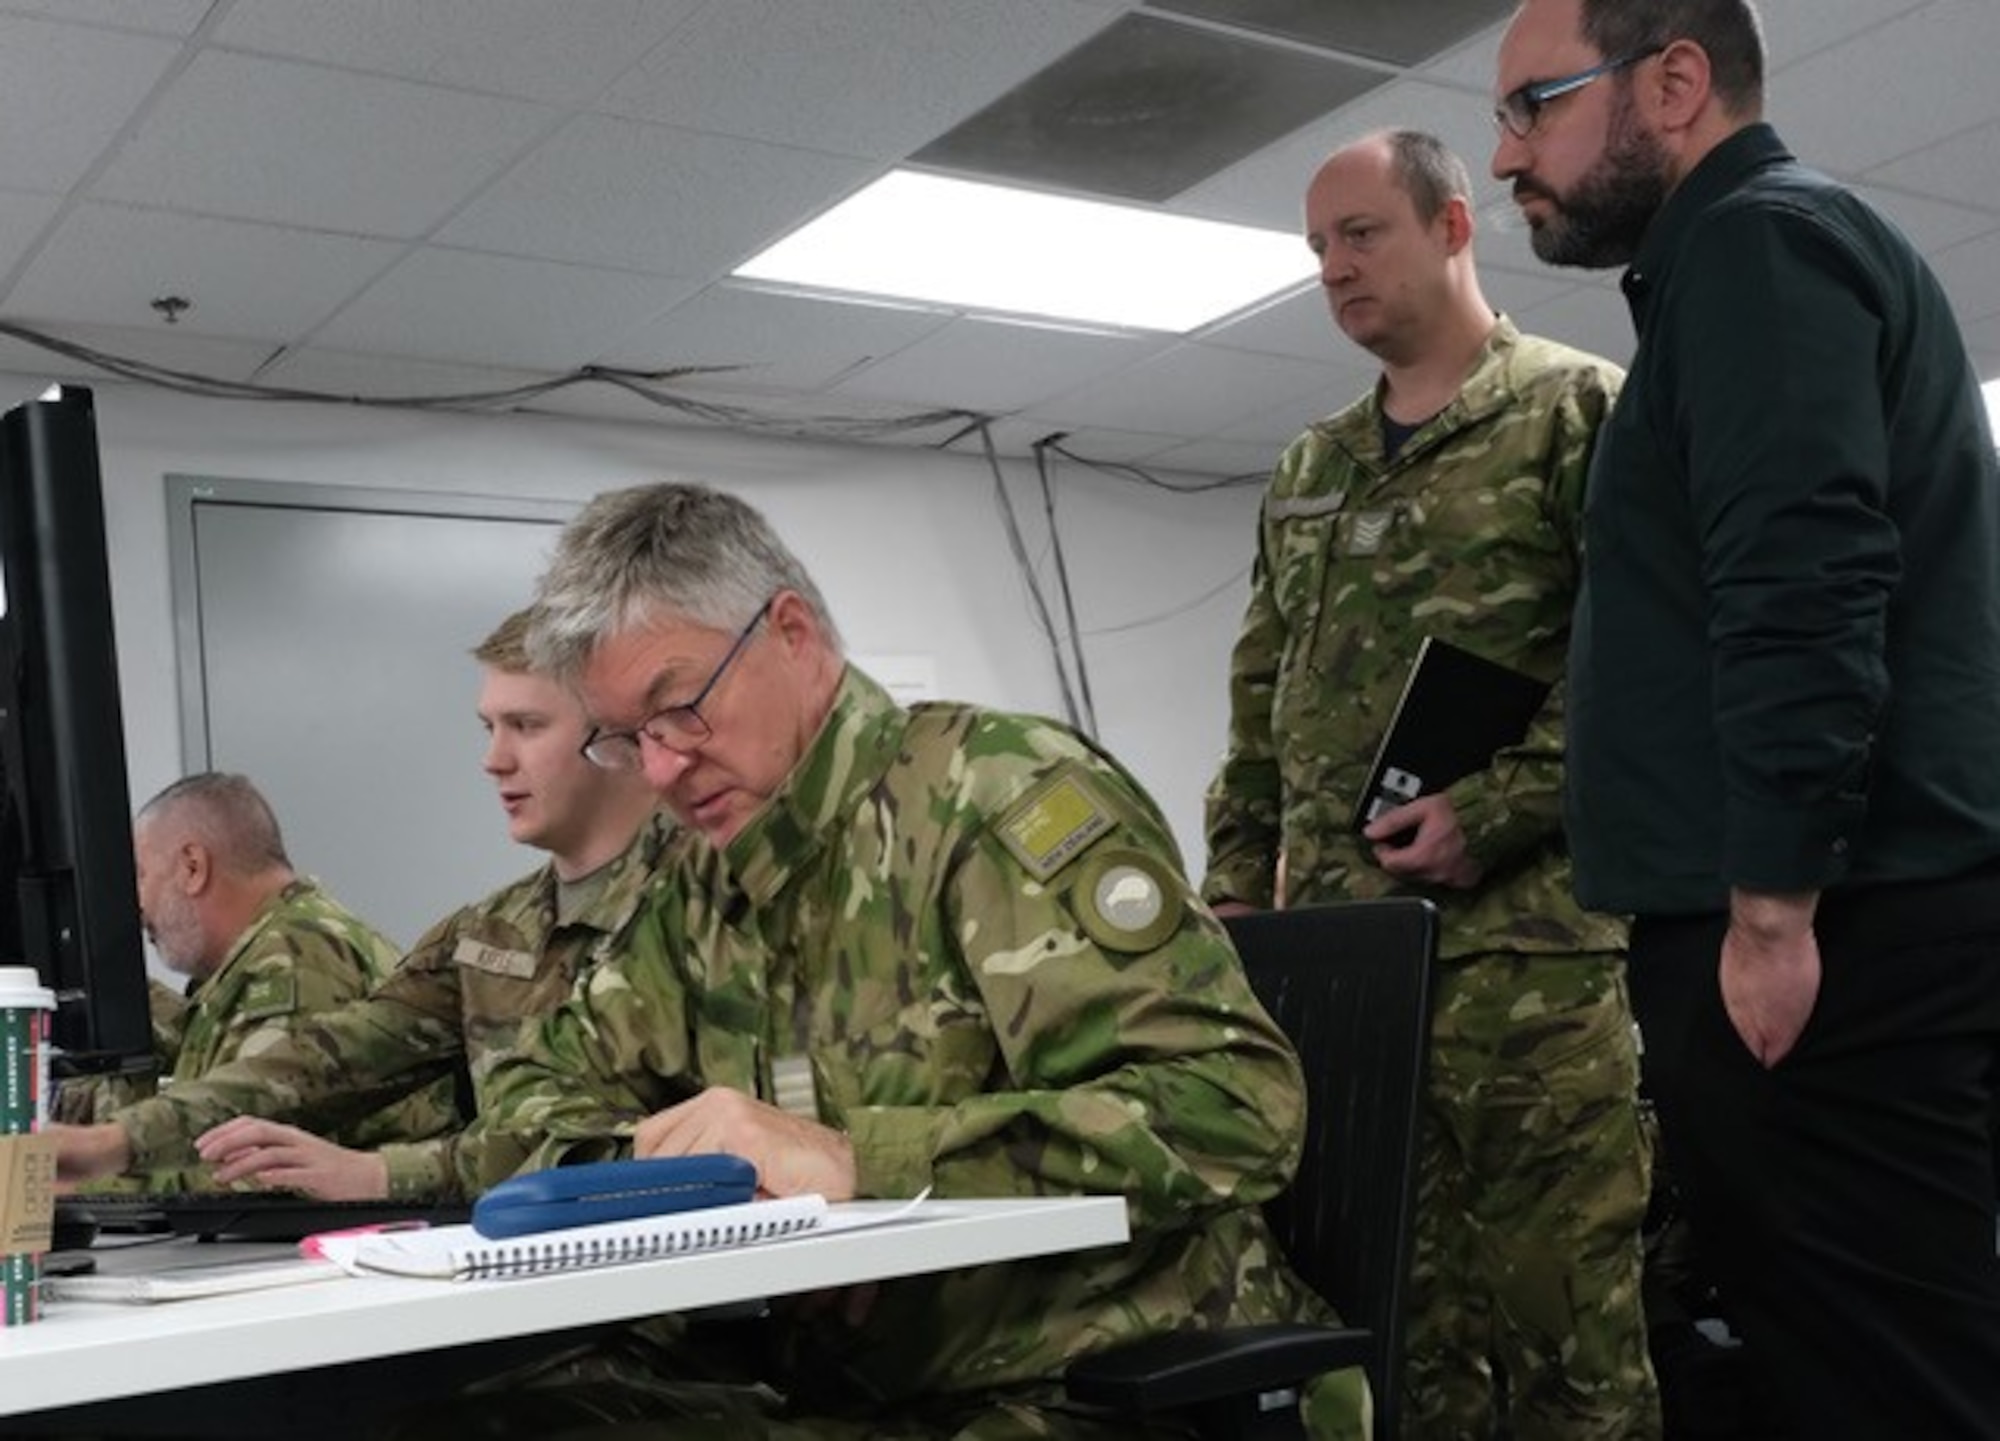 US and New Zealand military members work on computers